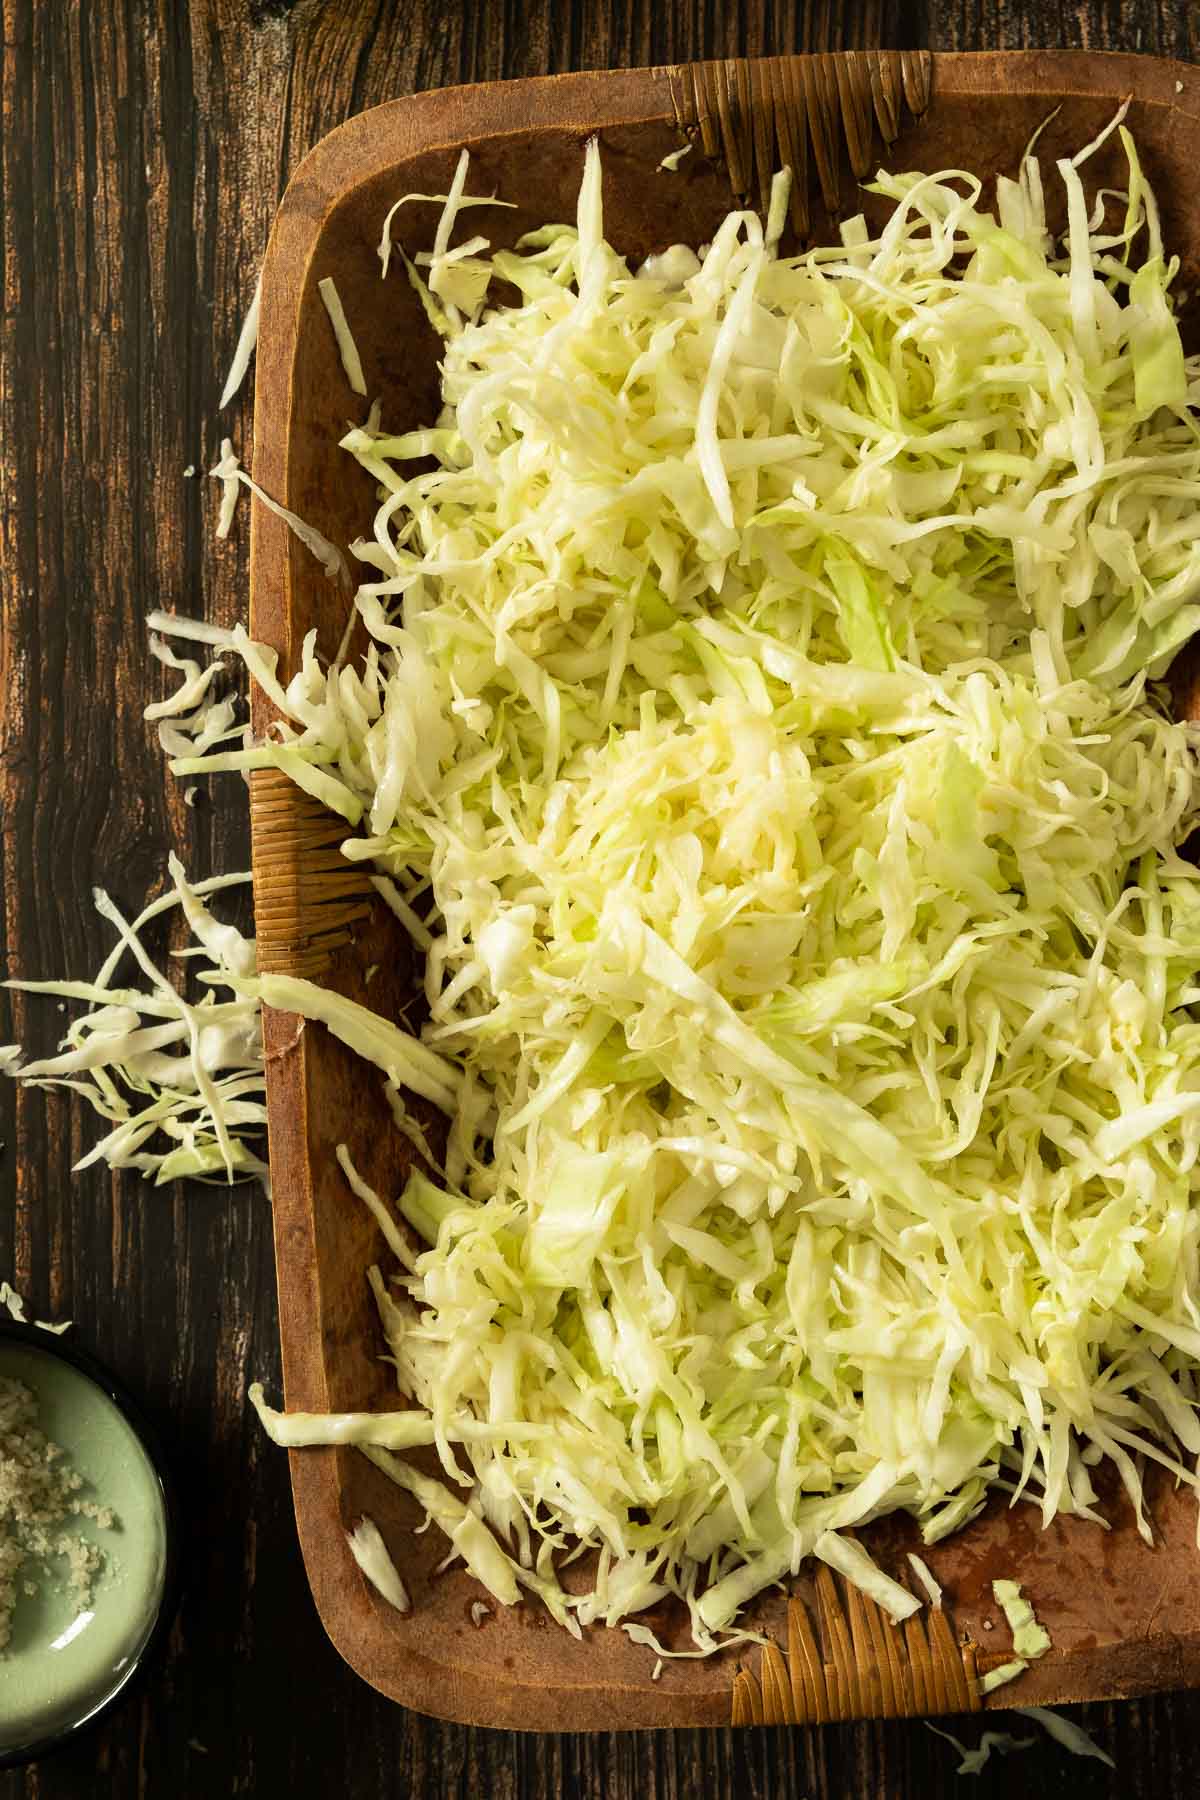 Shredded and salted cabbage in a large wooden bowl.